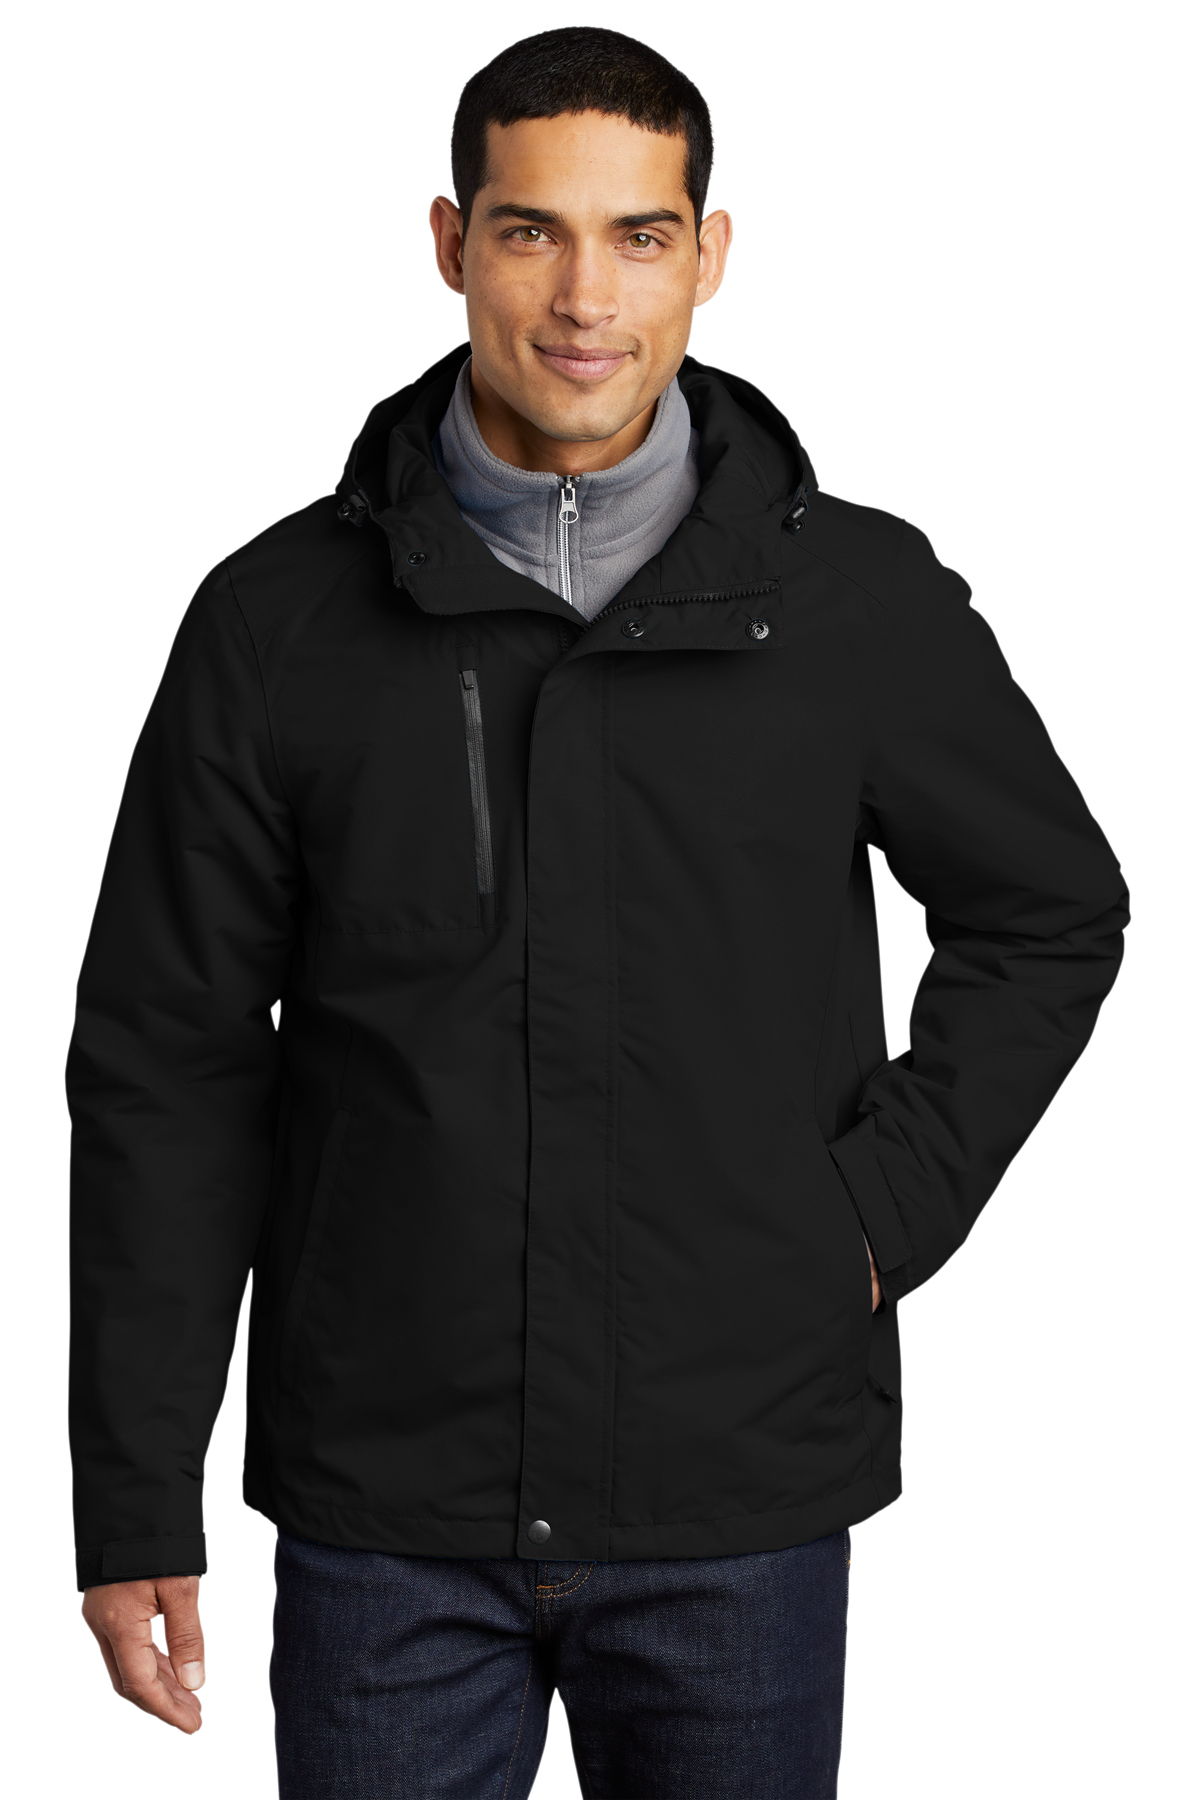 Port Authority All-Conditions Jacket | Product | Company Casuals